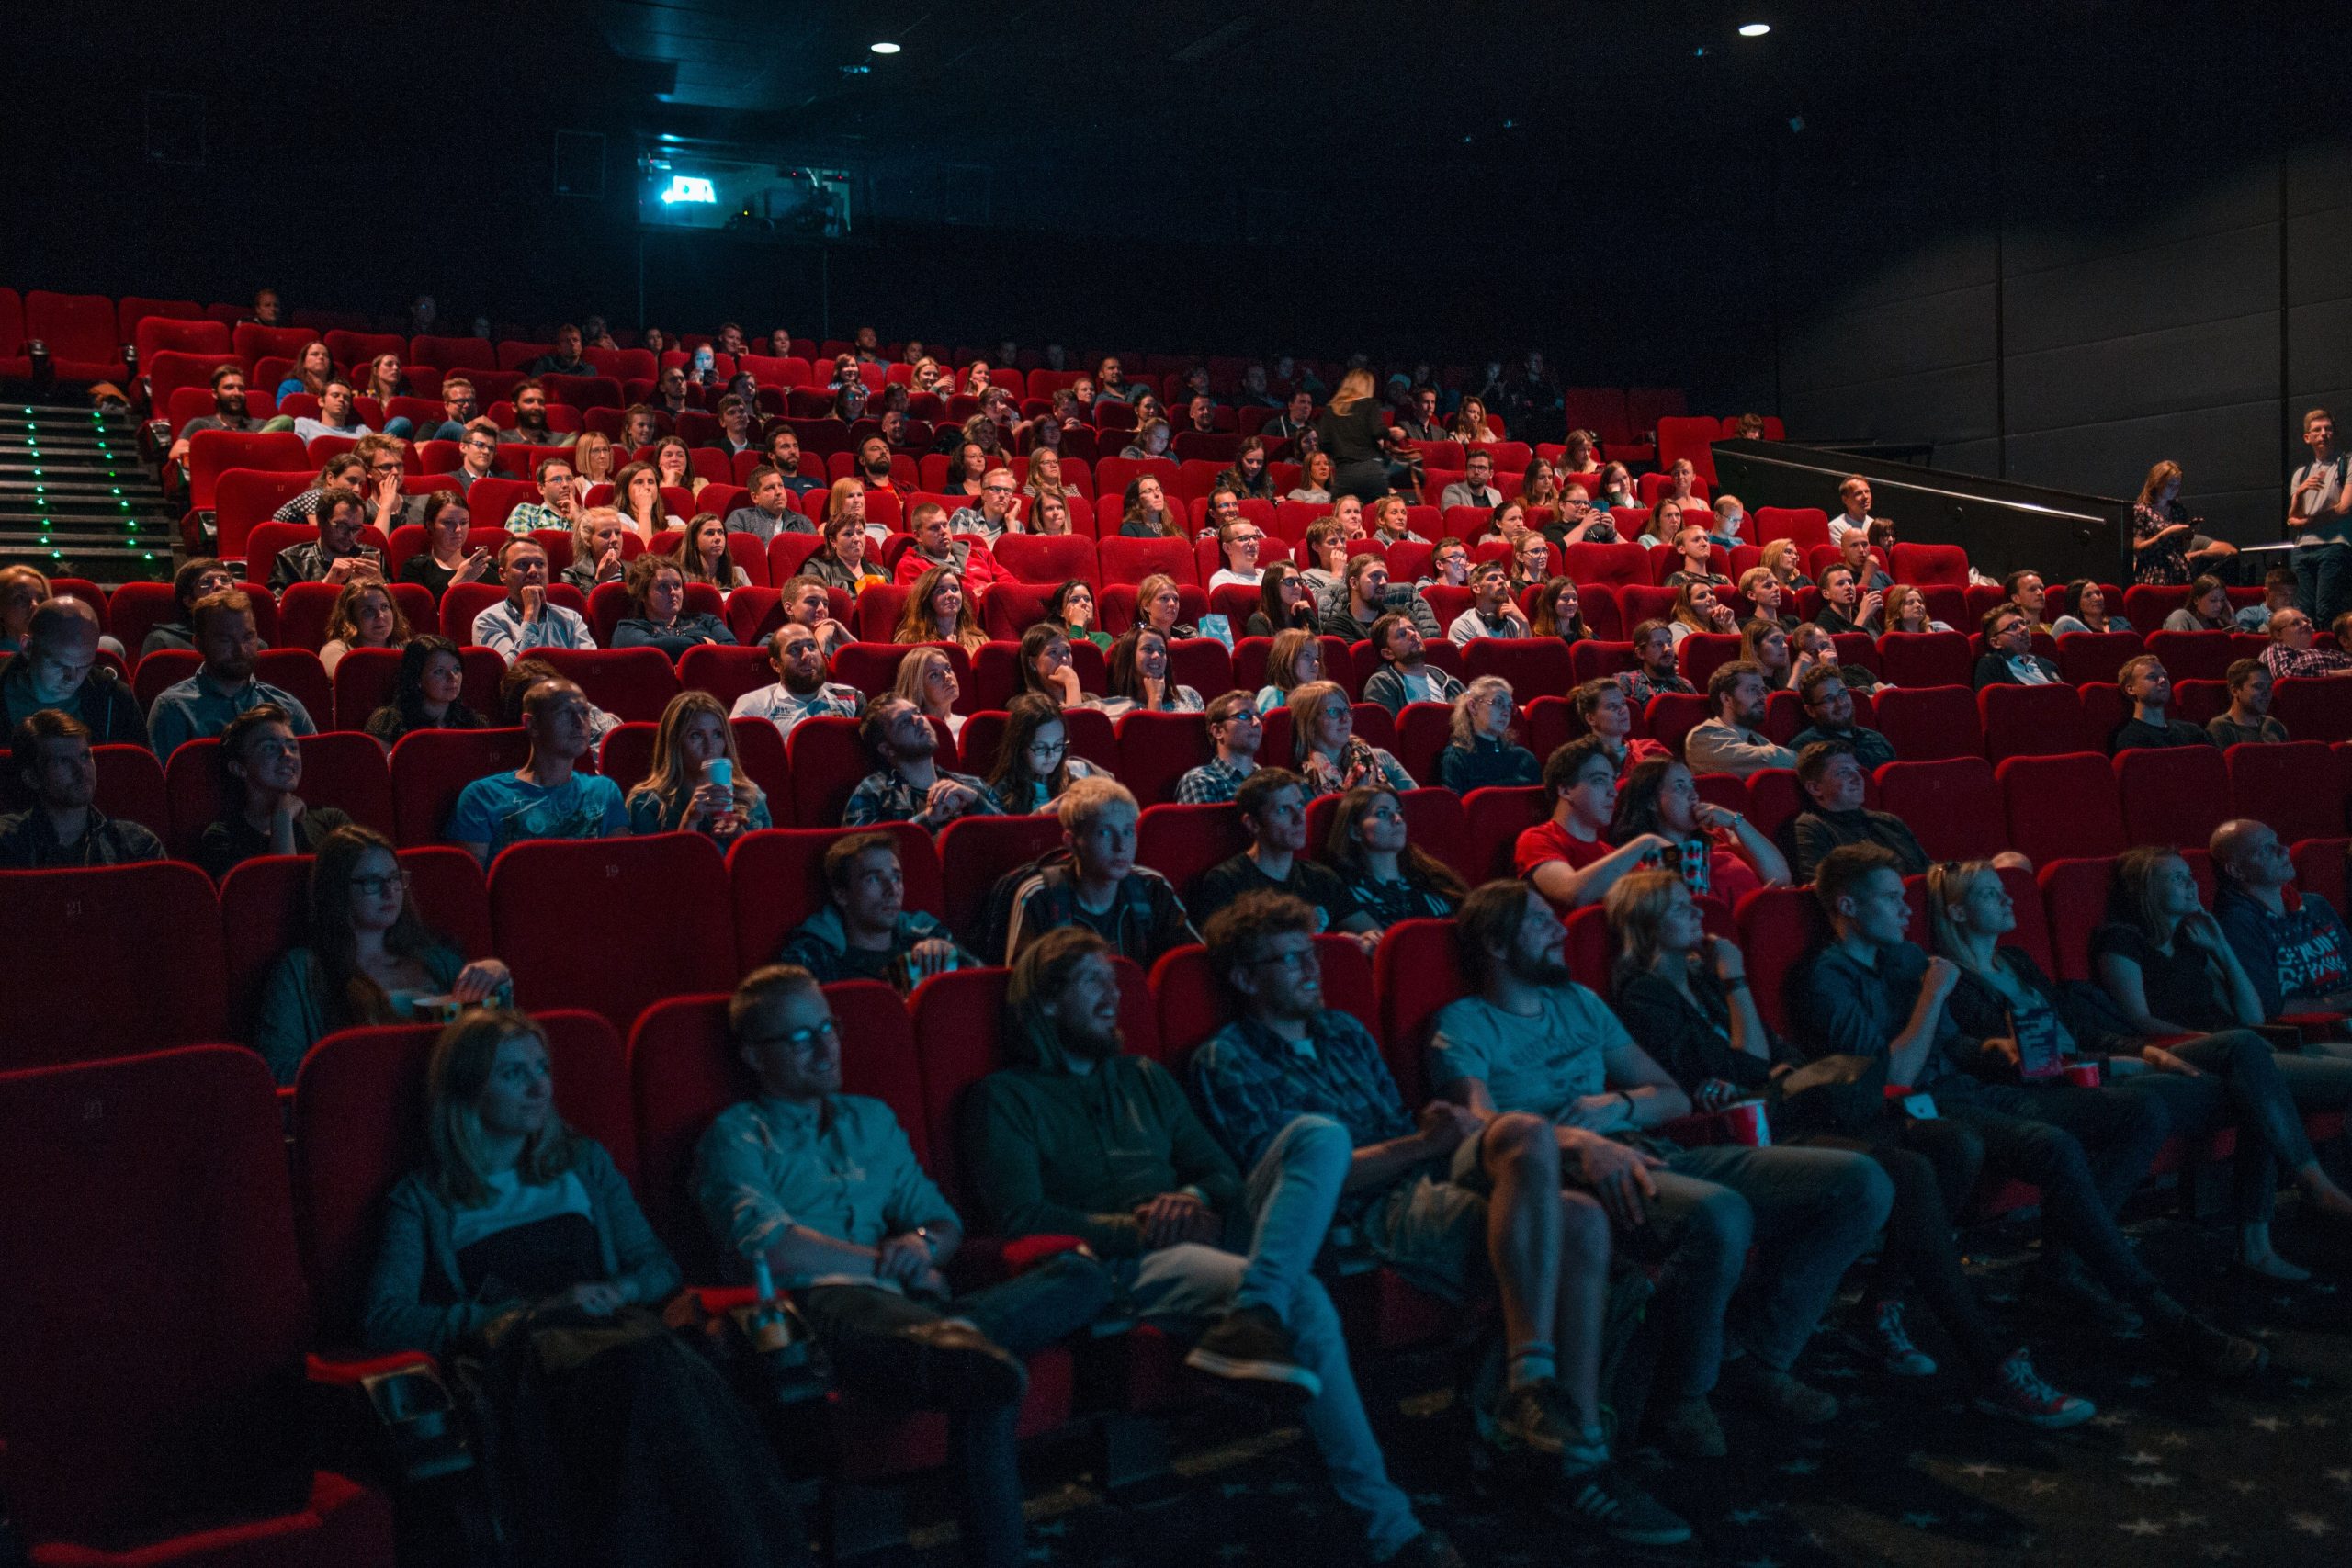 How safe is it go to movie theatres?